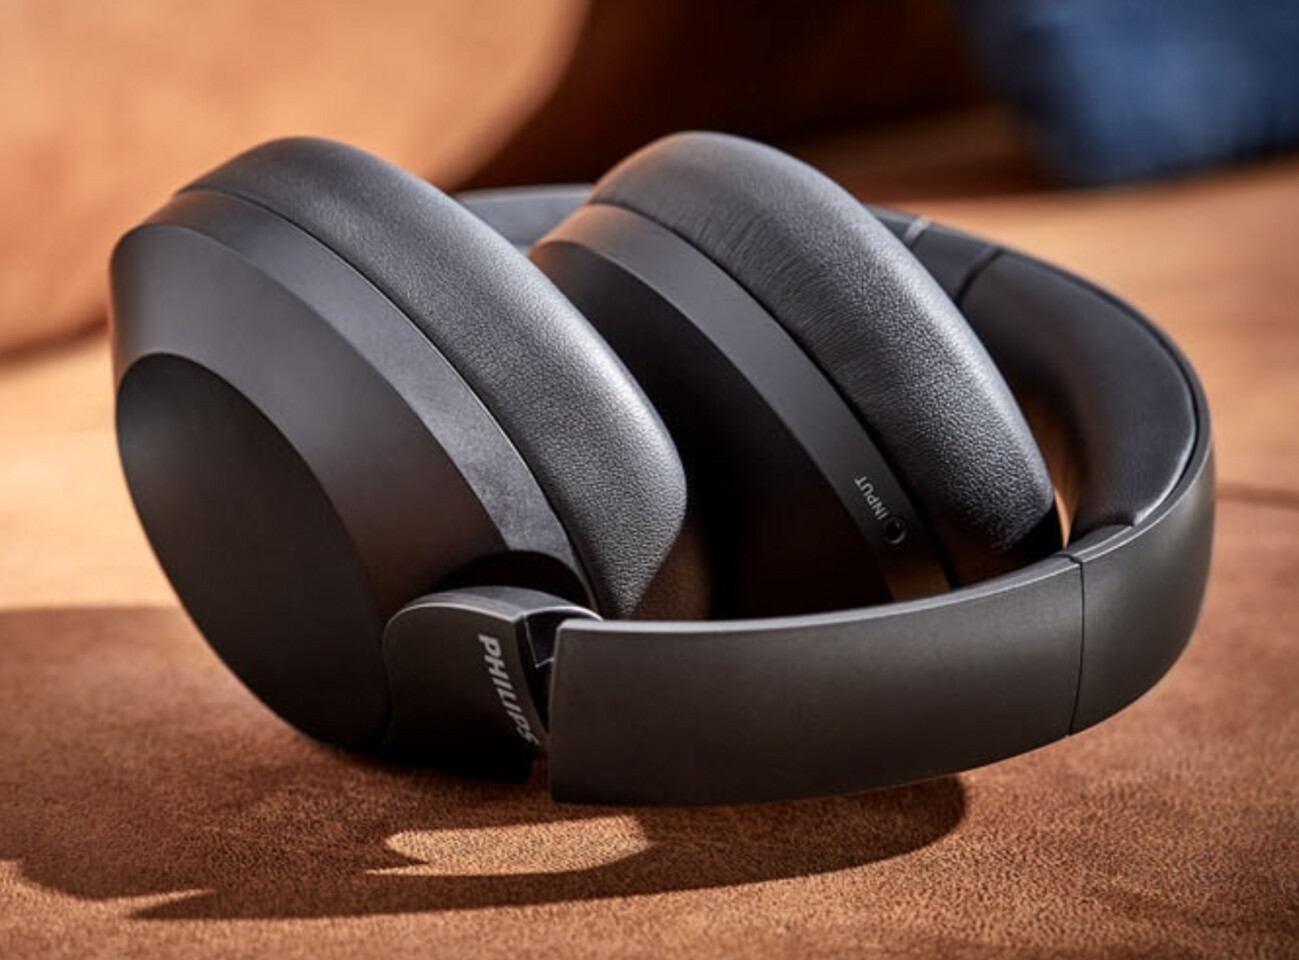 Philips Launches New Over-Ear Wireless Active Noise Canceling 